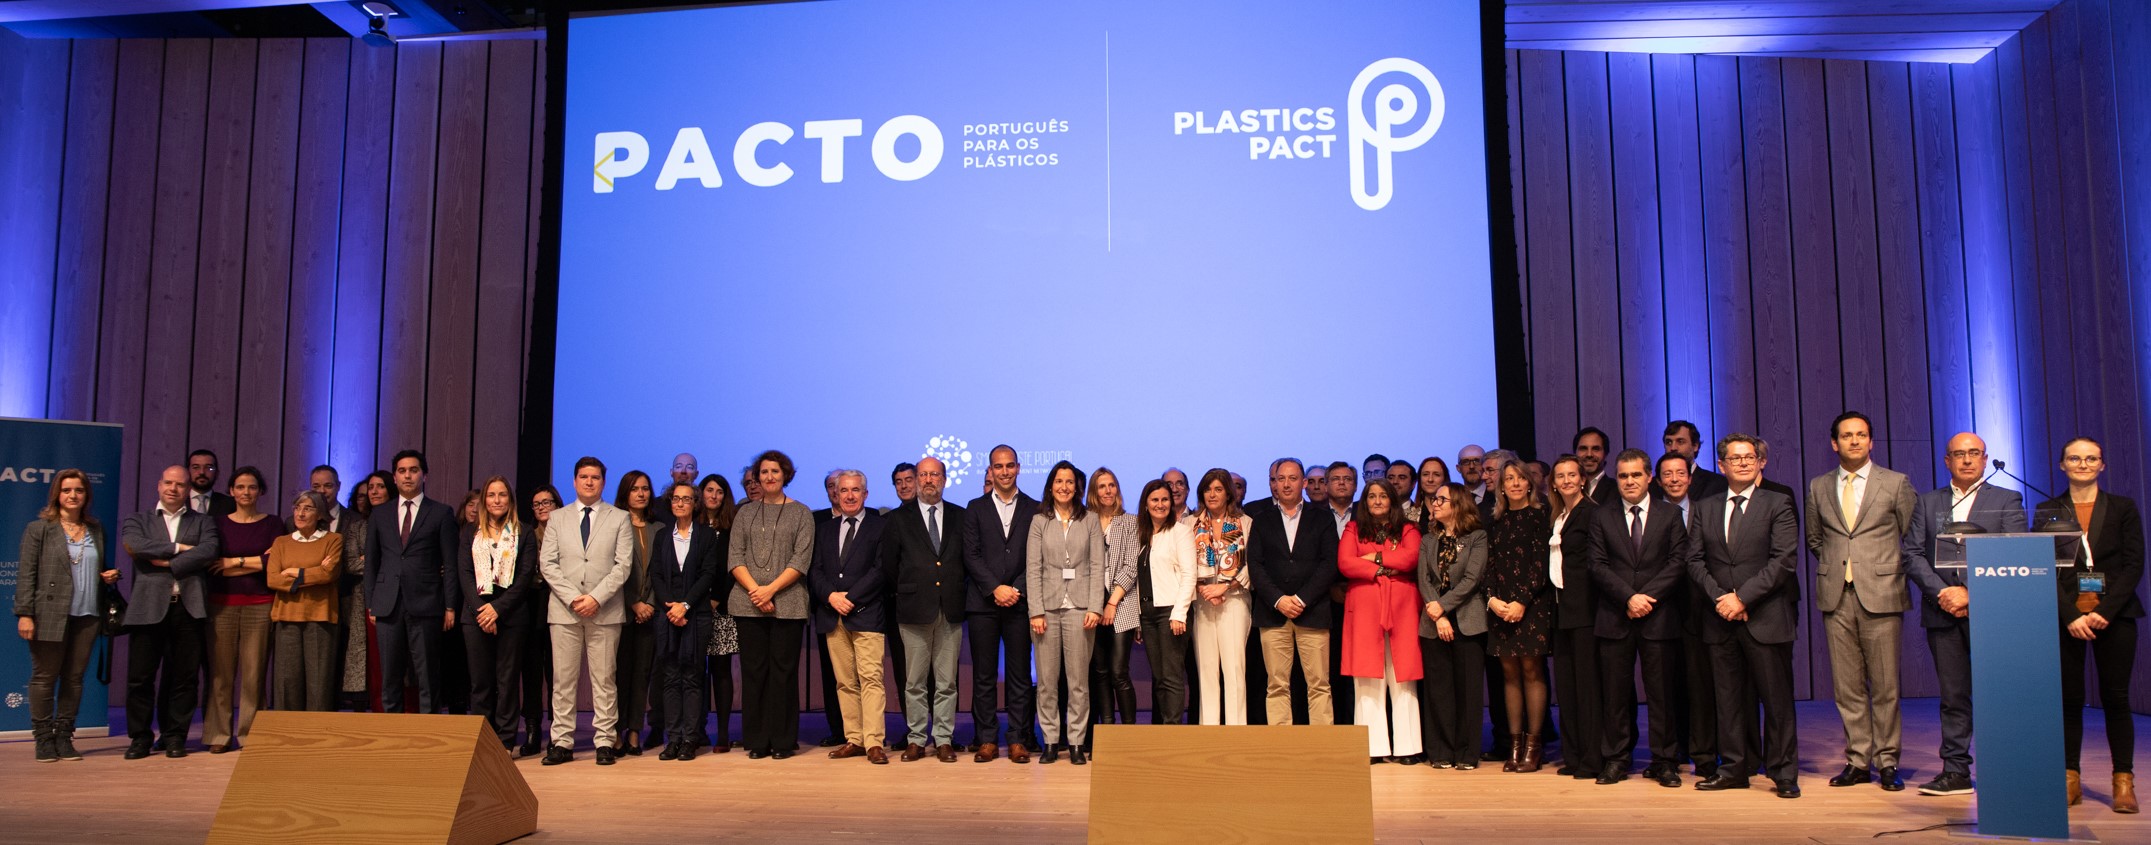 The power of commitment: Portuguese Plastics Pact